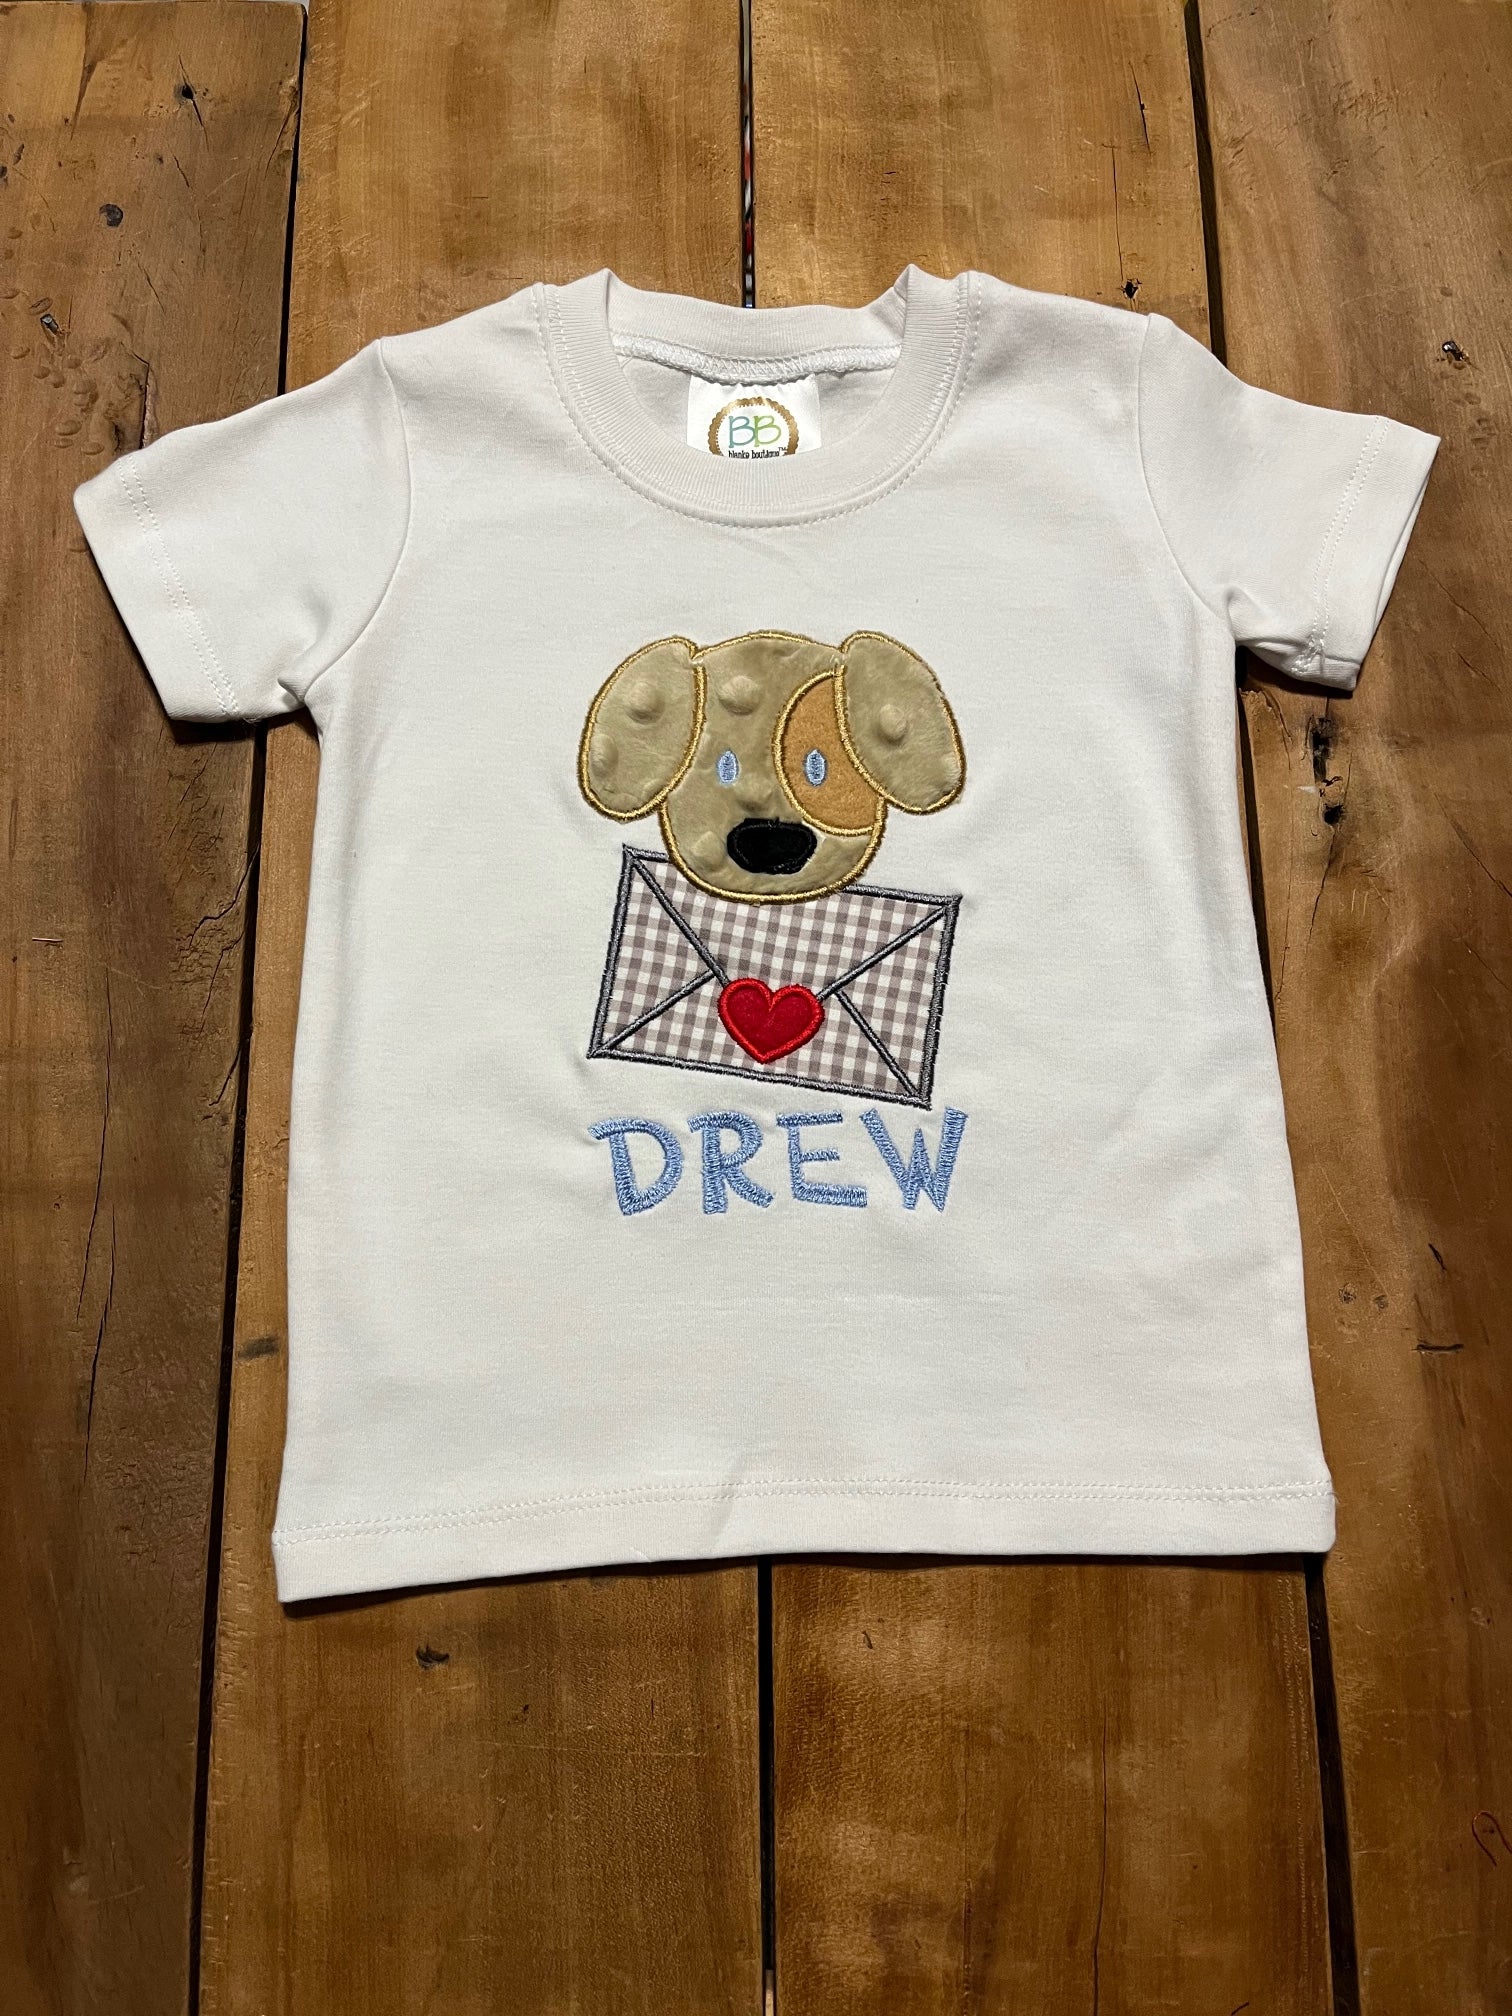 white shirt with puppy valentine's day applique design, name shown in "Charlie" font